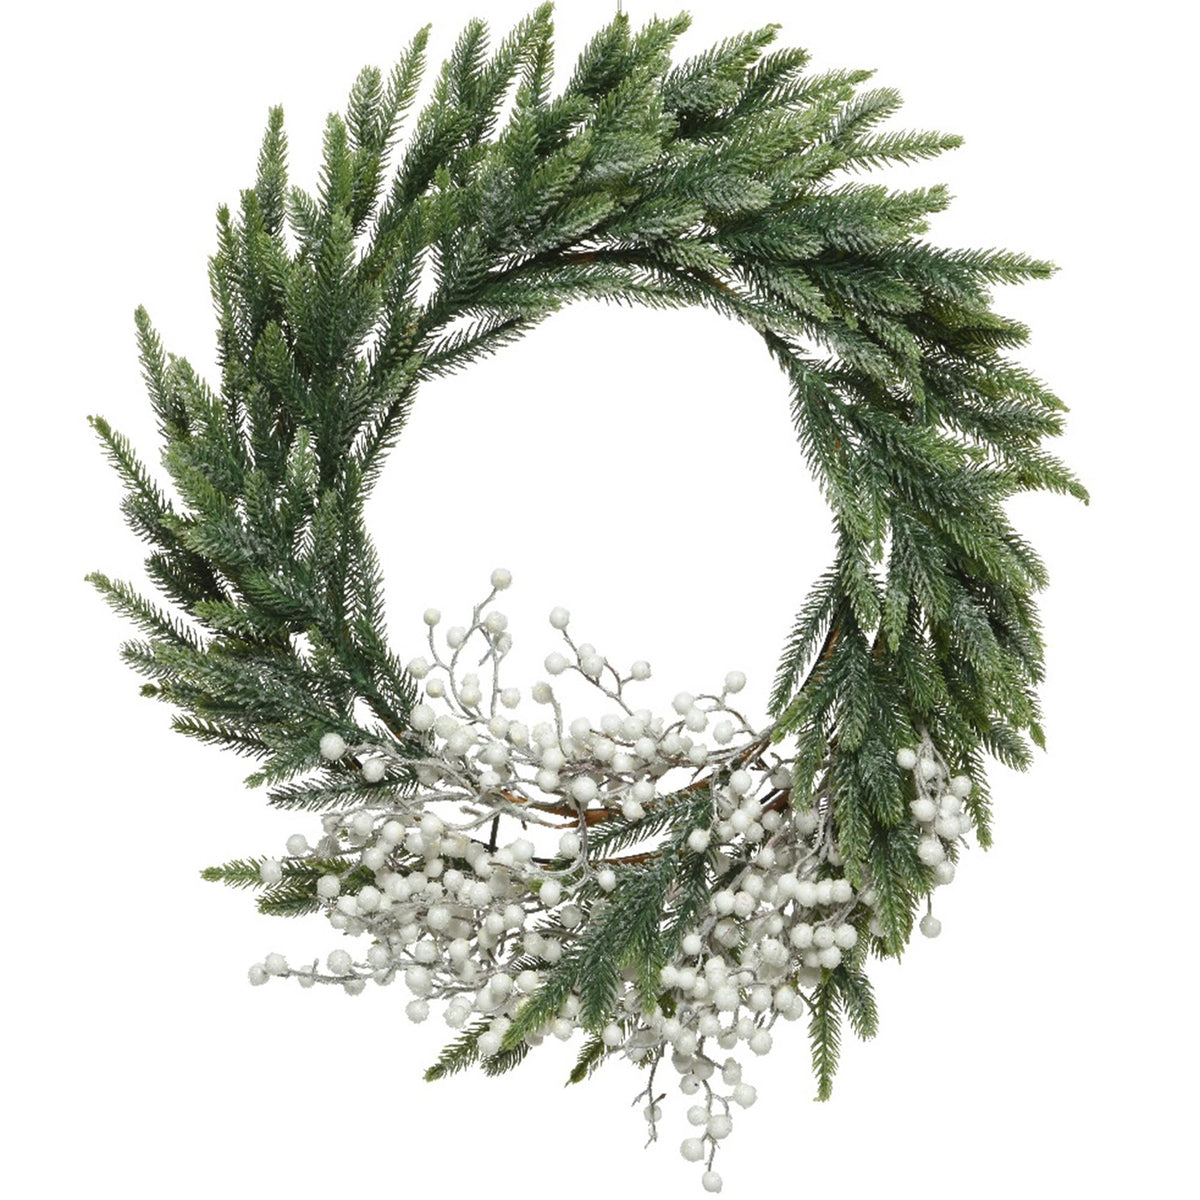 60cm Luxury Wreath with Frosted White Berry Decorations